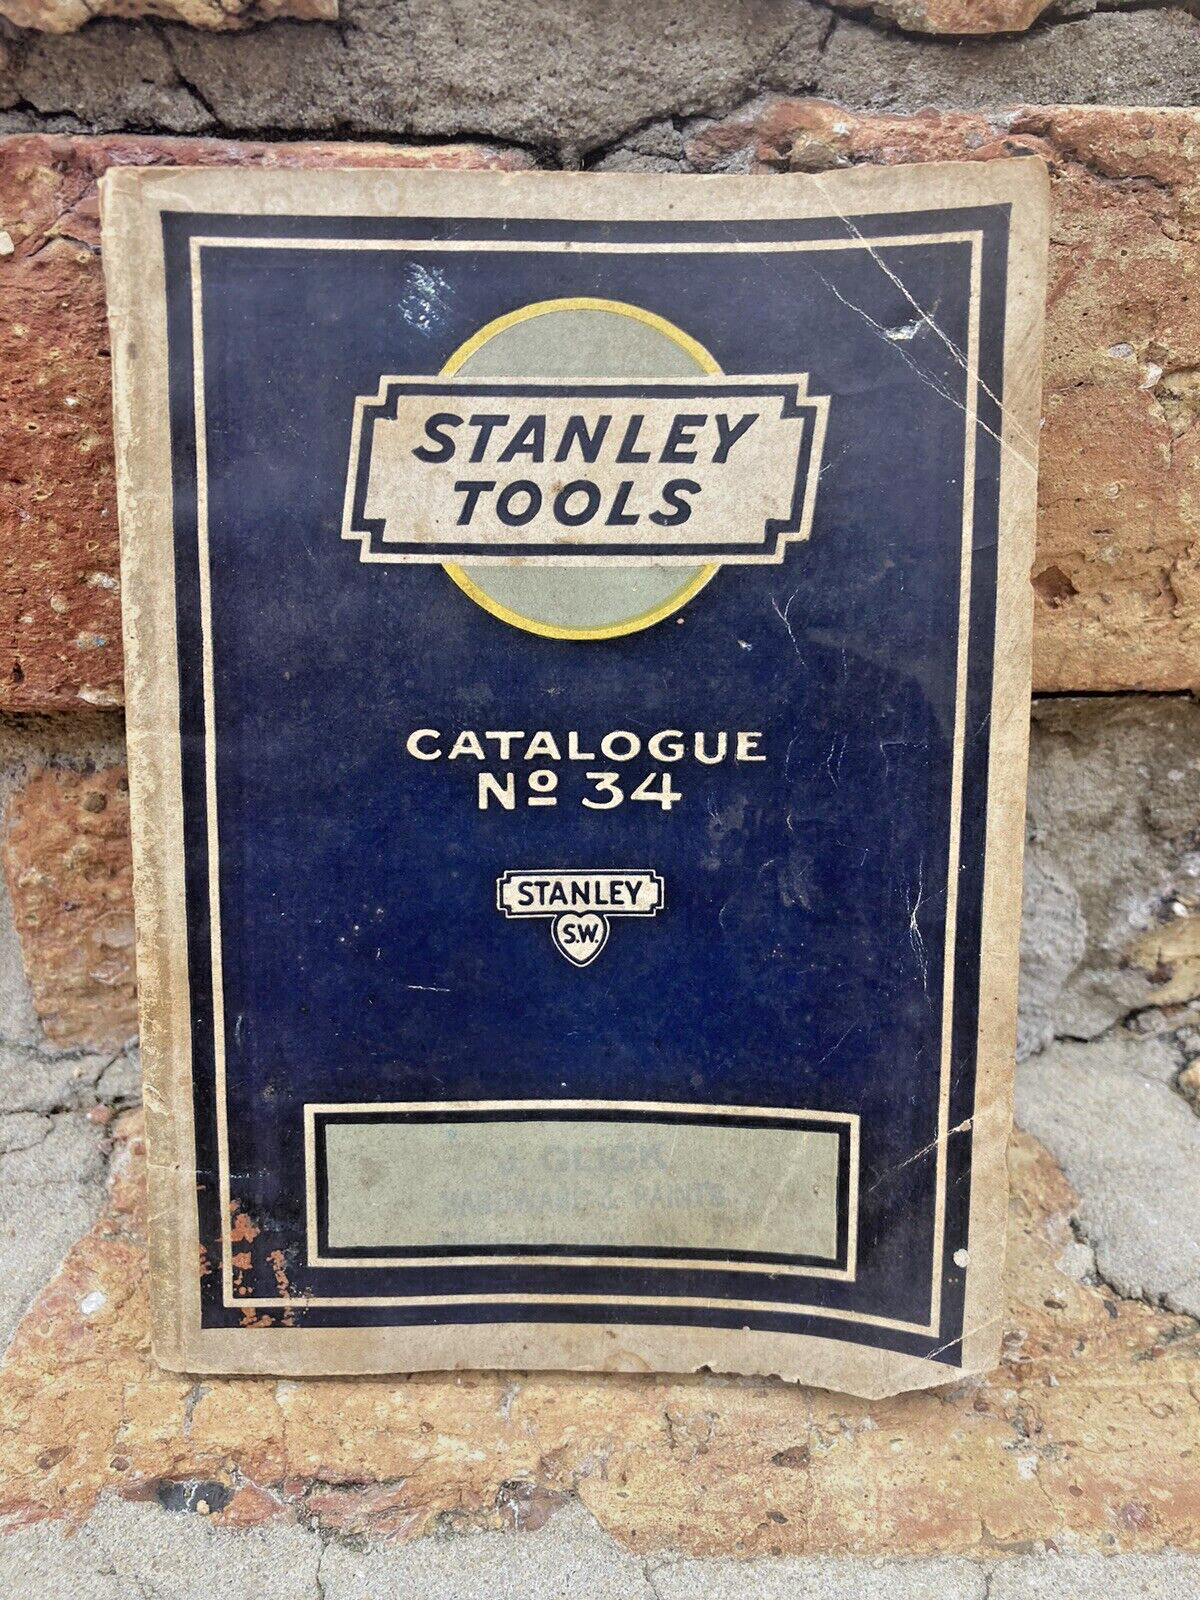 ANTIQUE 1927 STANLEY WOOD TOOLS SW SWEETHEART CATALOGUE NO 34 WORKING PLANE BOOK